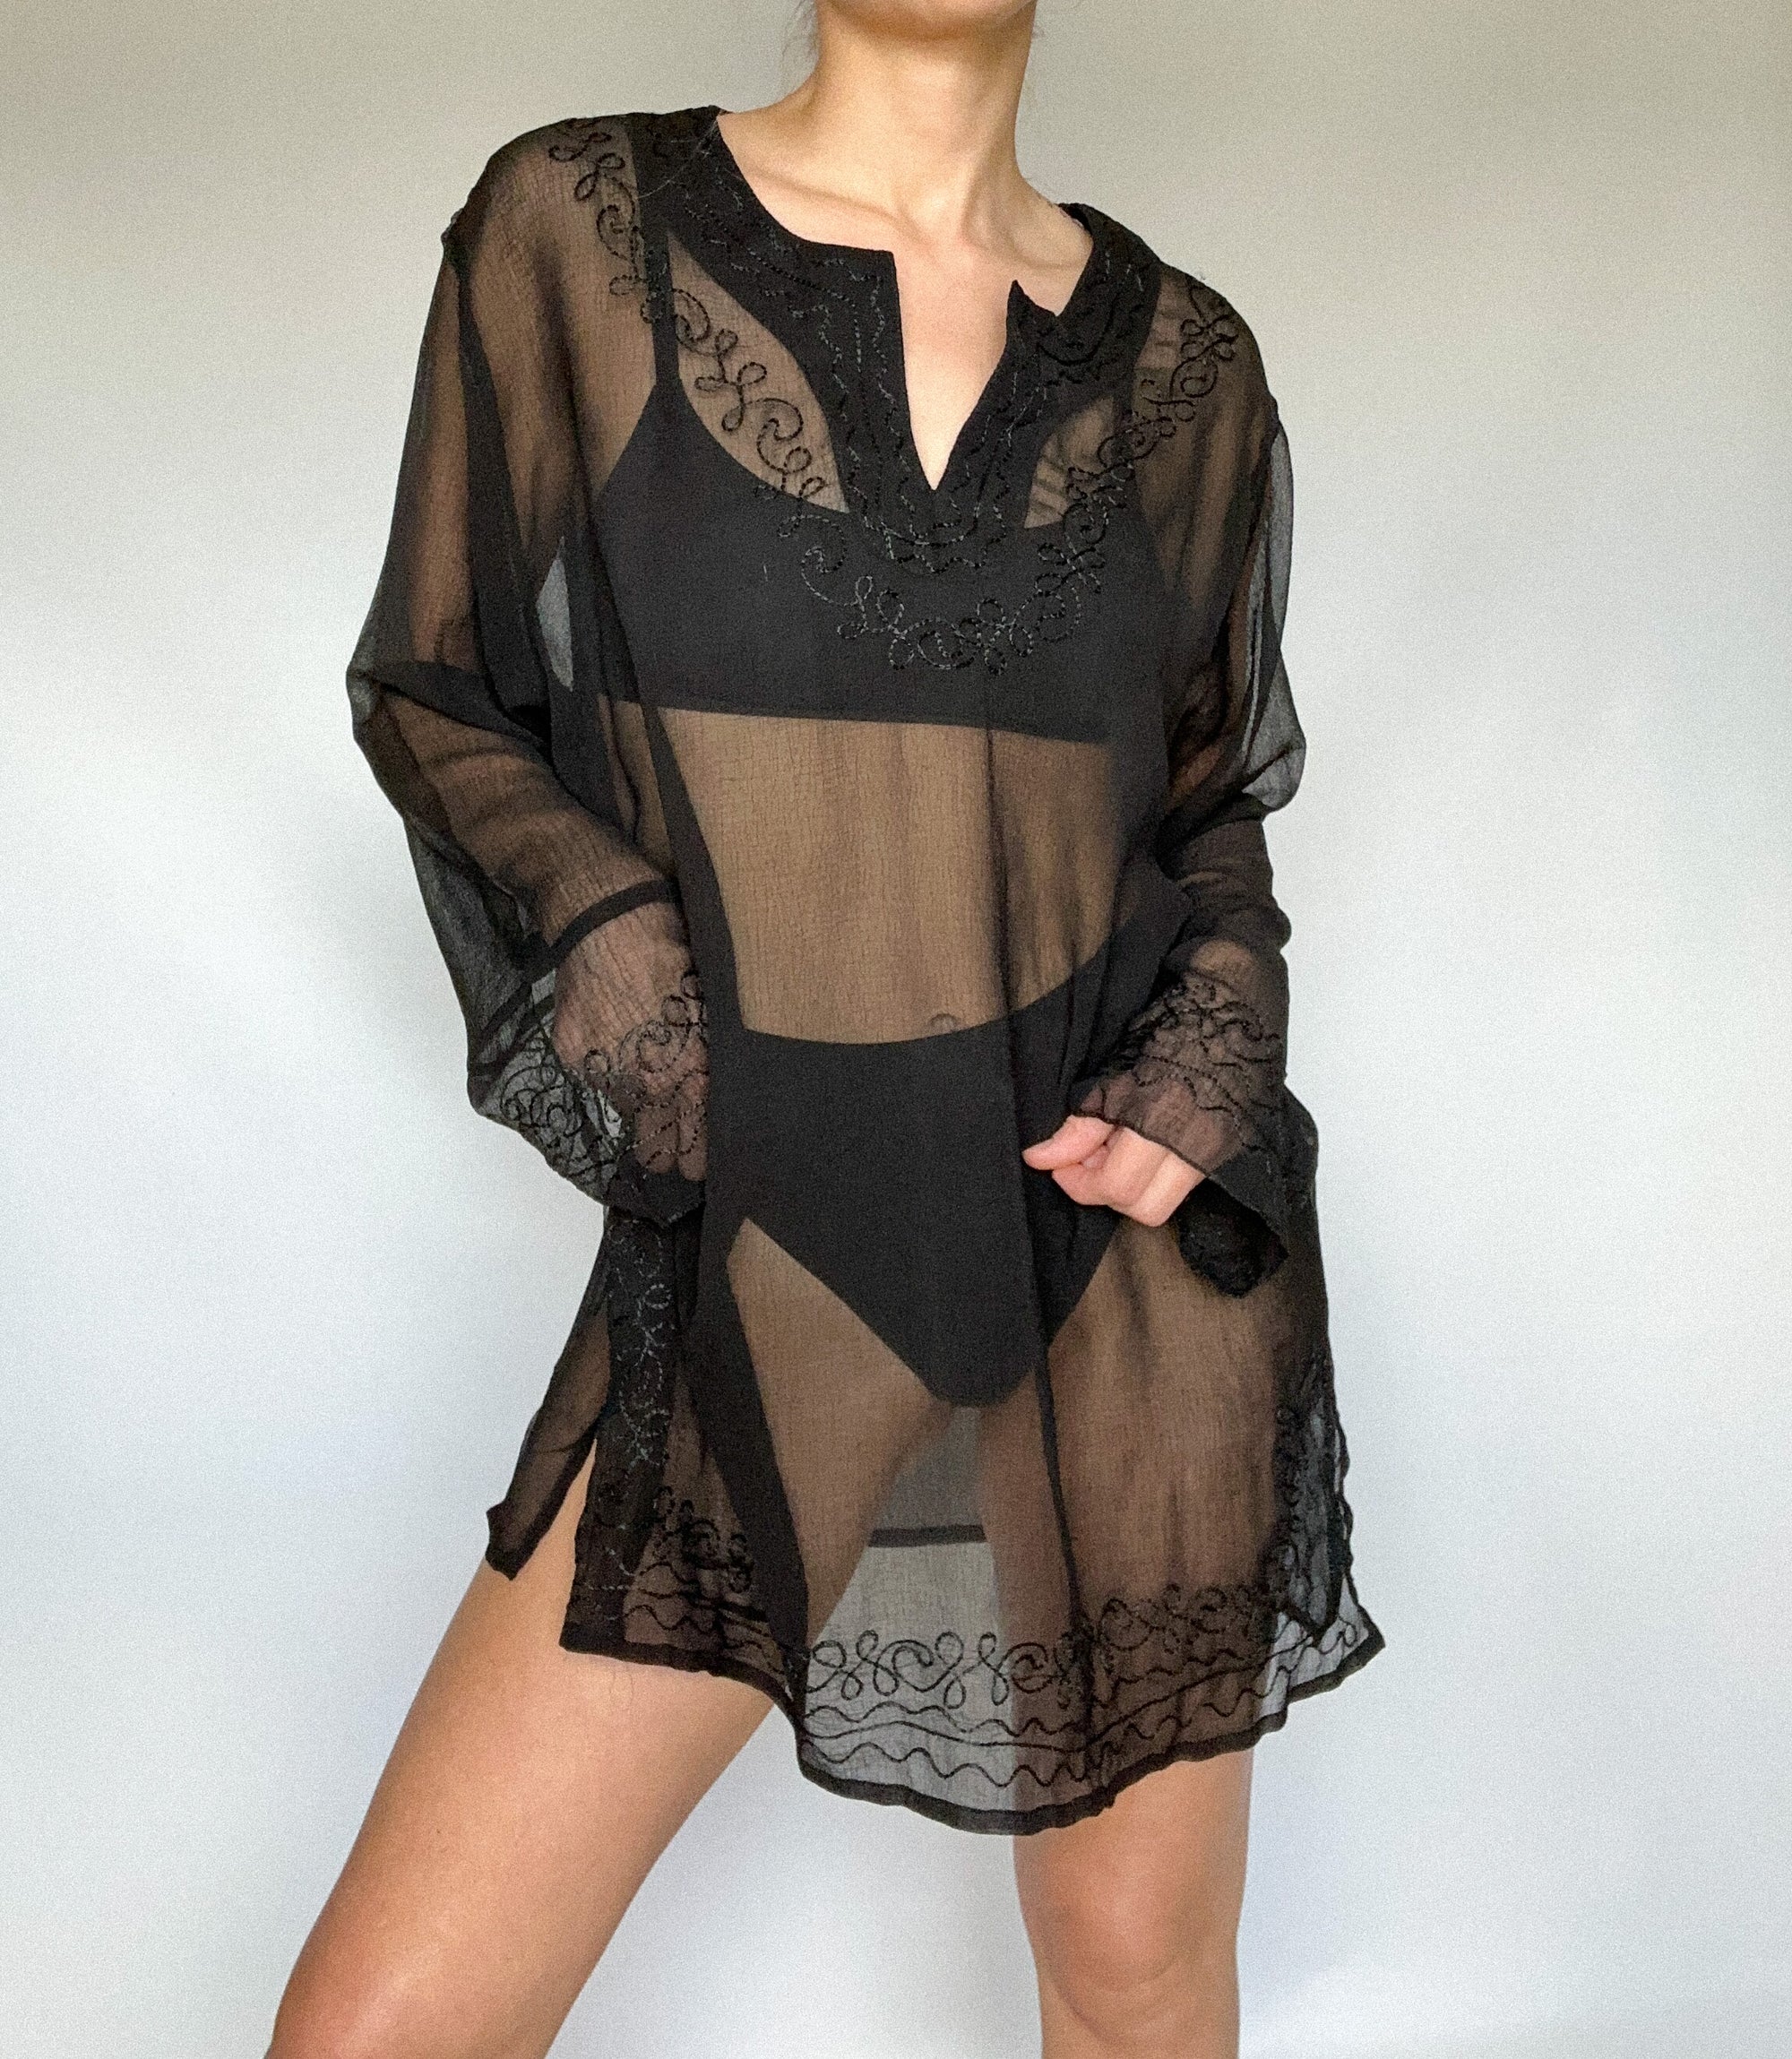 Sheer Dress/Cover Up